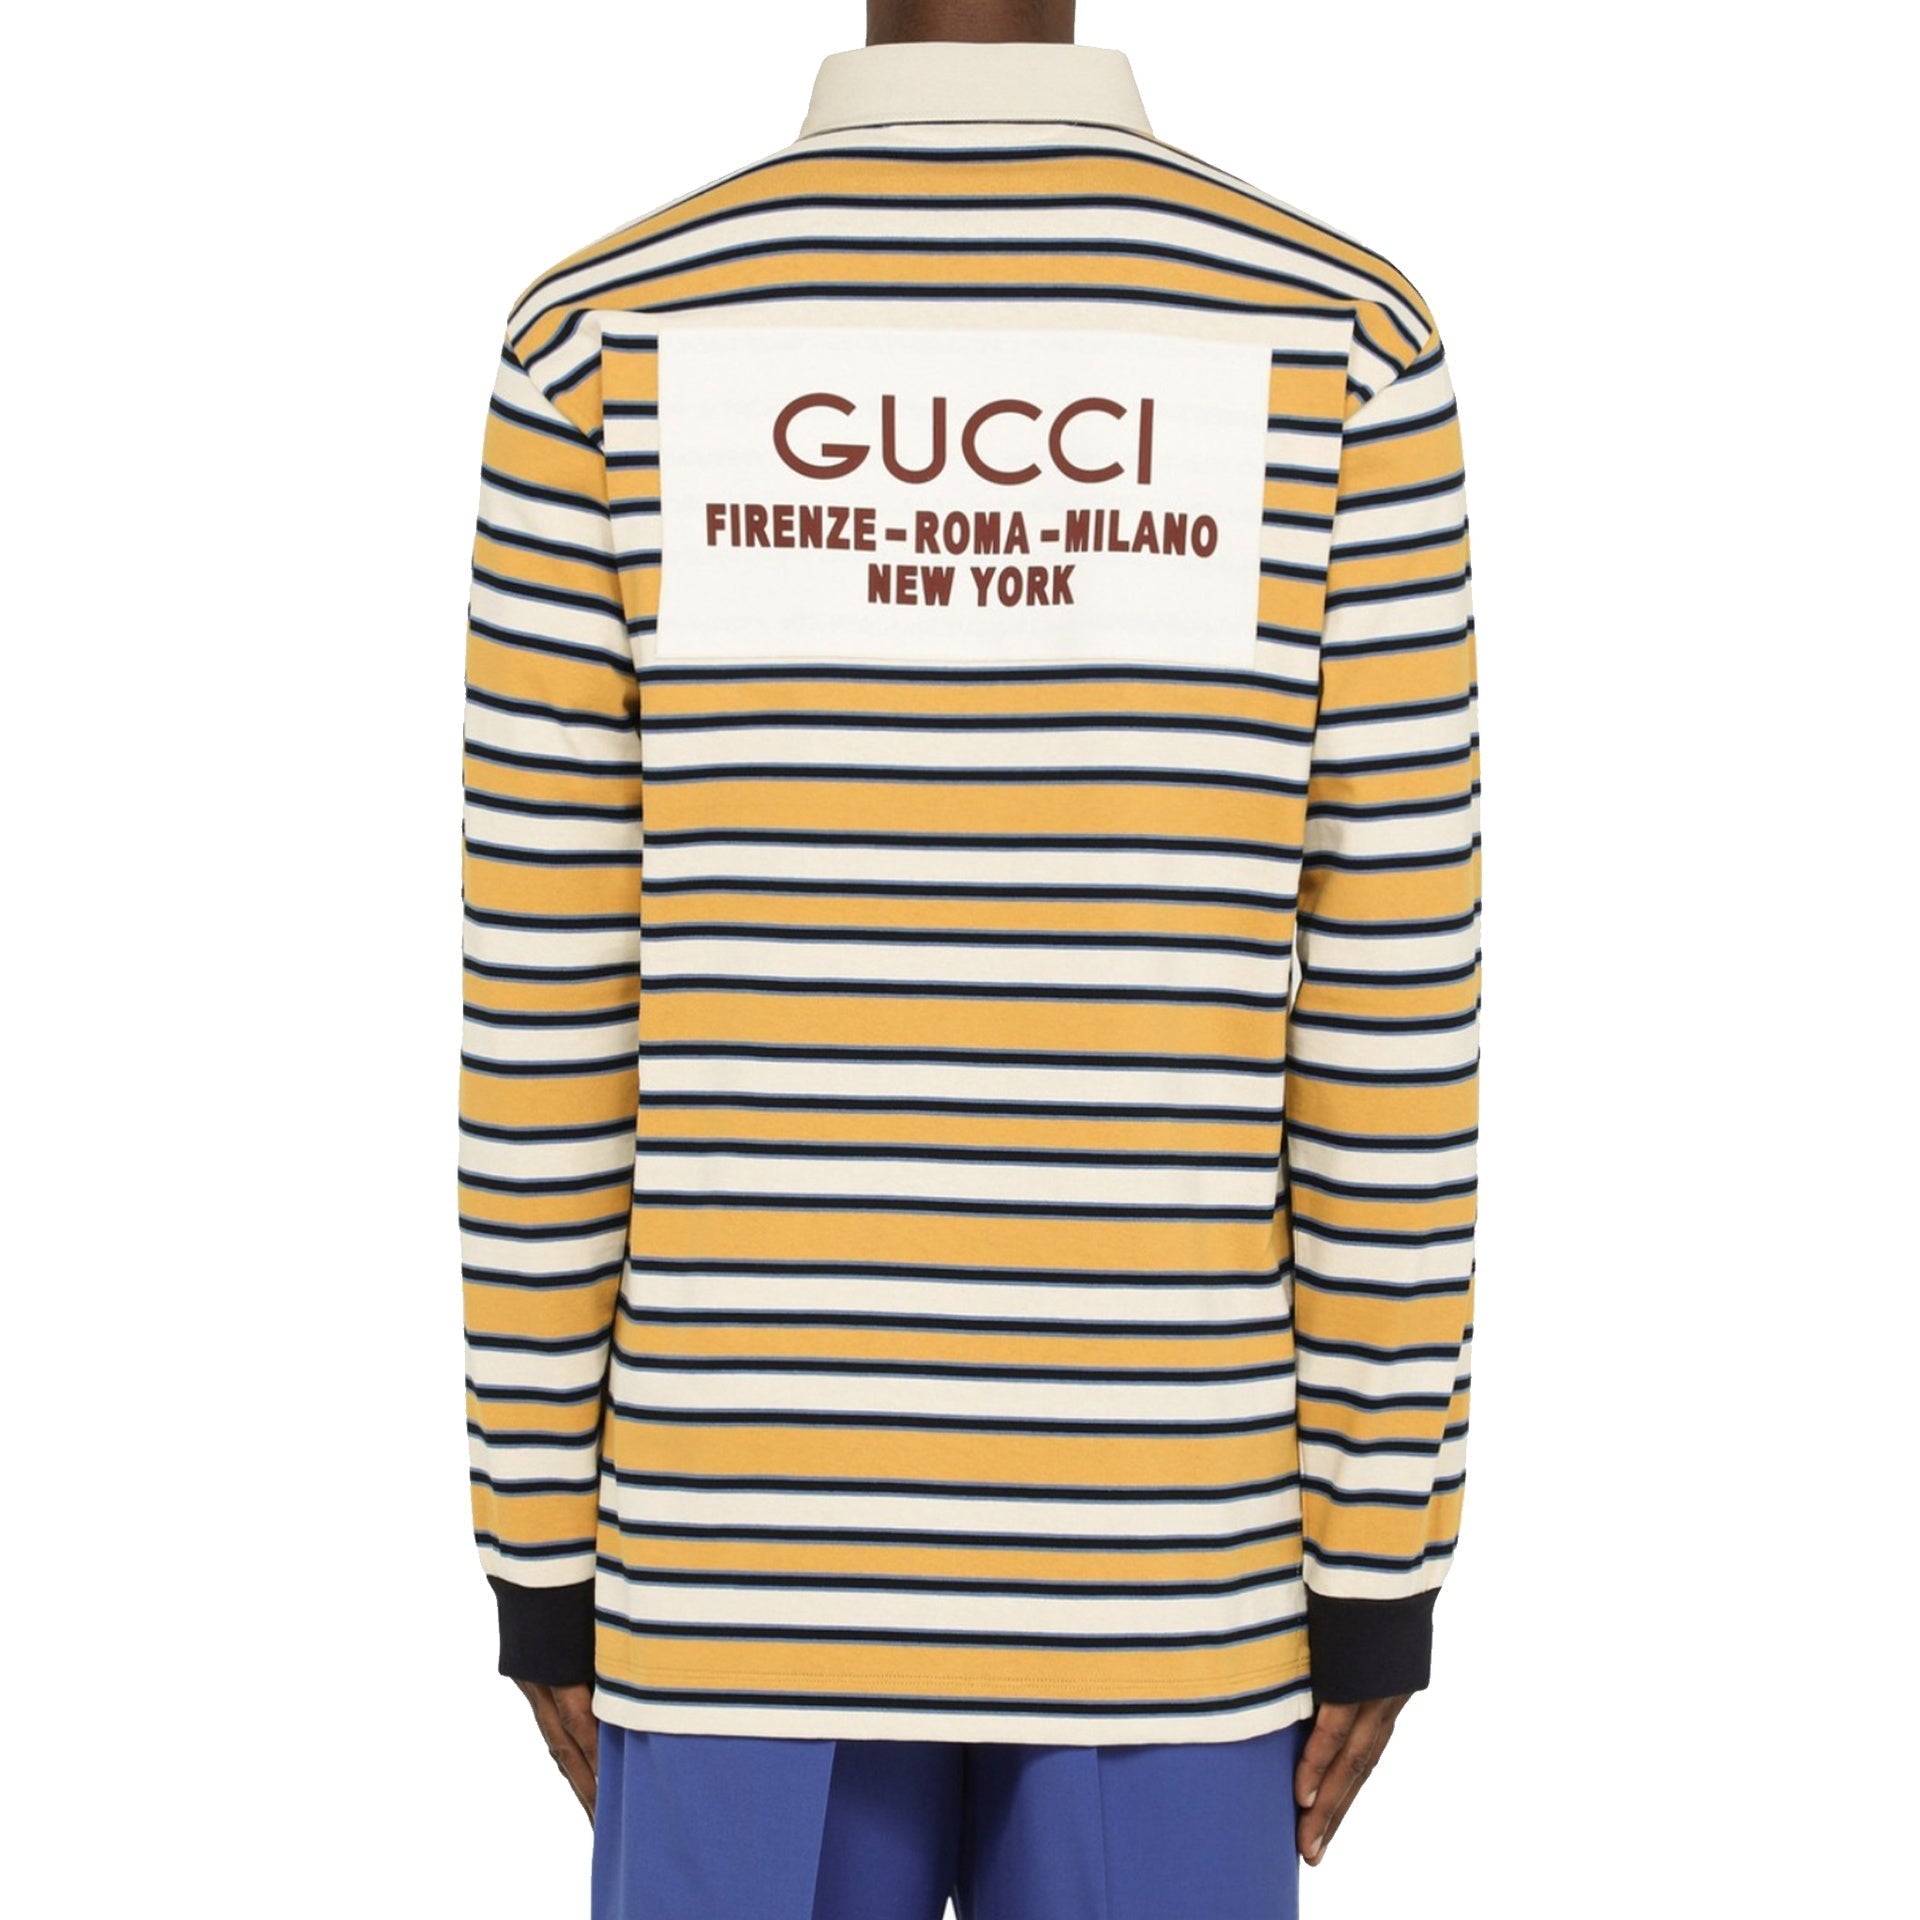 GUCCI-OUTLET-SALE-Gucci-Striped-Polo-Shirt-Shirts-ARCHIVE-COLLECTION-3.jpg